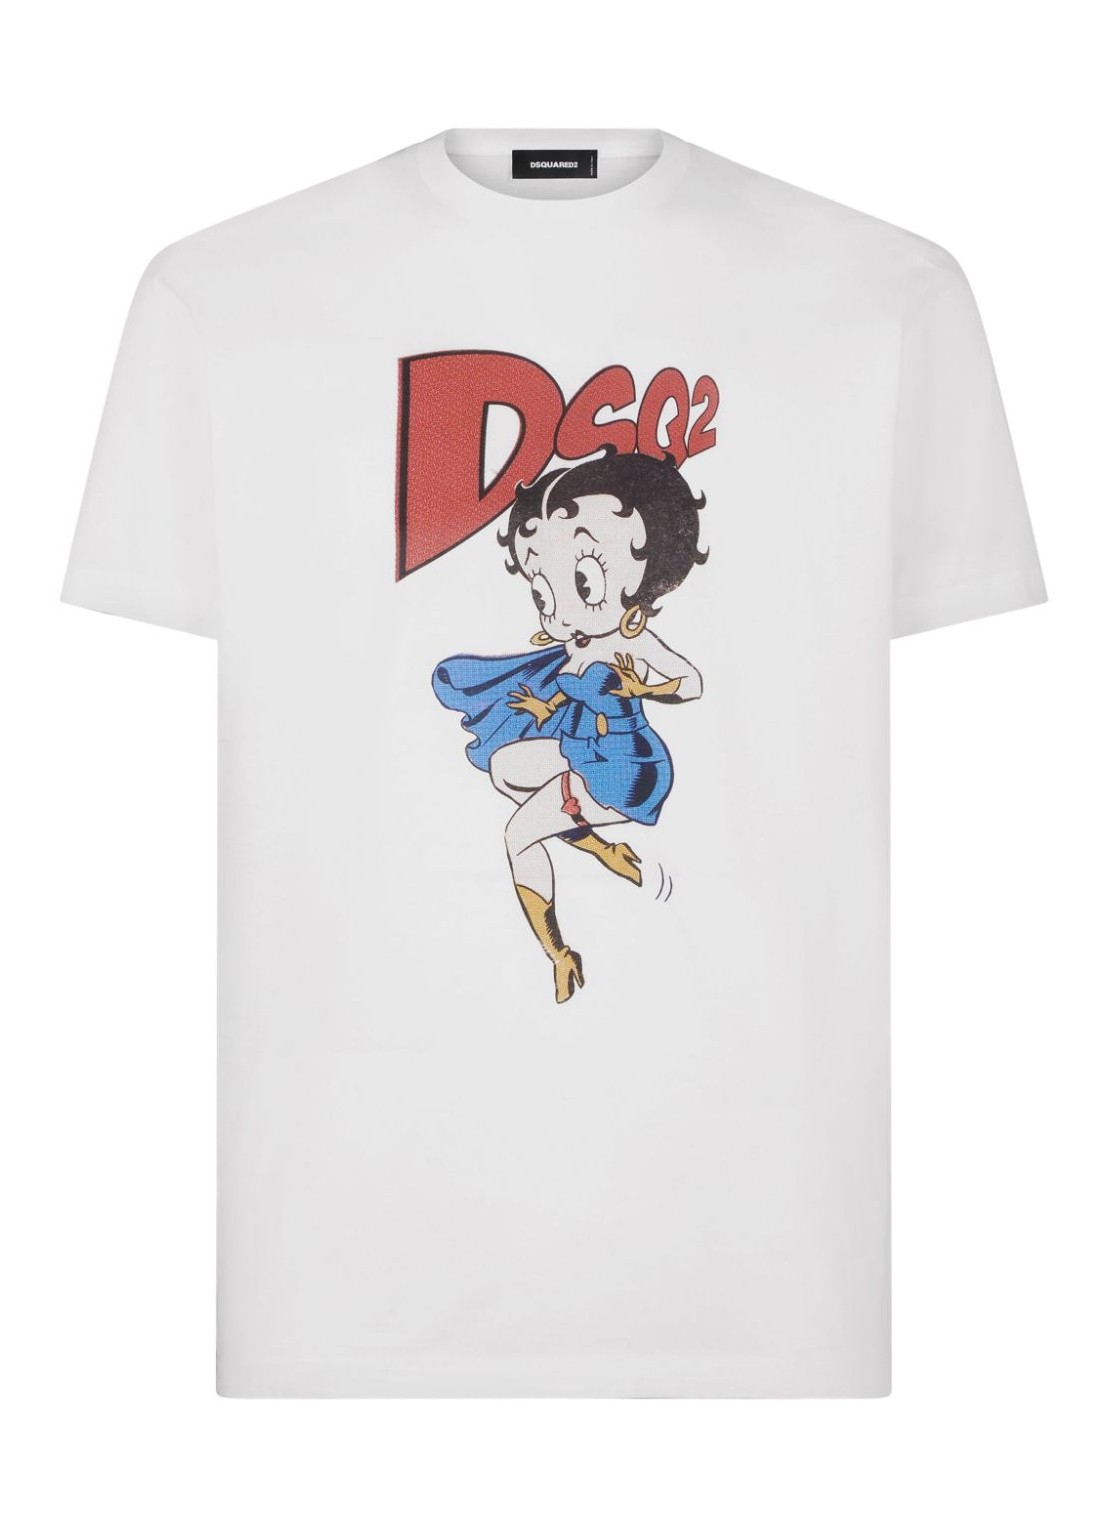 Camiseta dsquared t-shirt man betty boop cool fit tee s74gd1269s23009 100 talla S
 